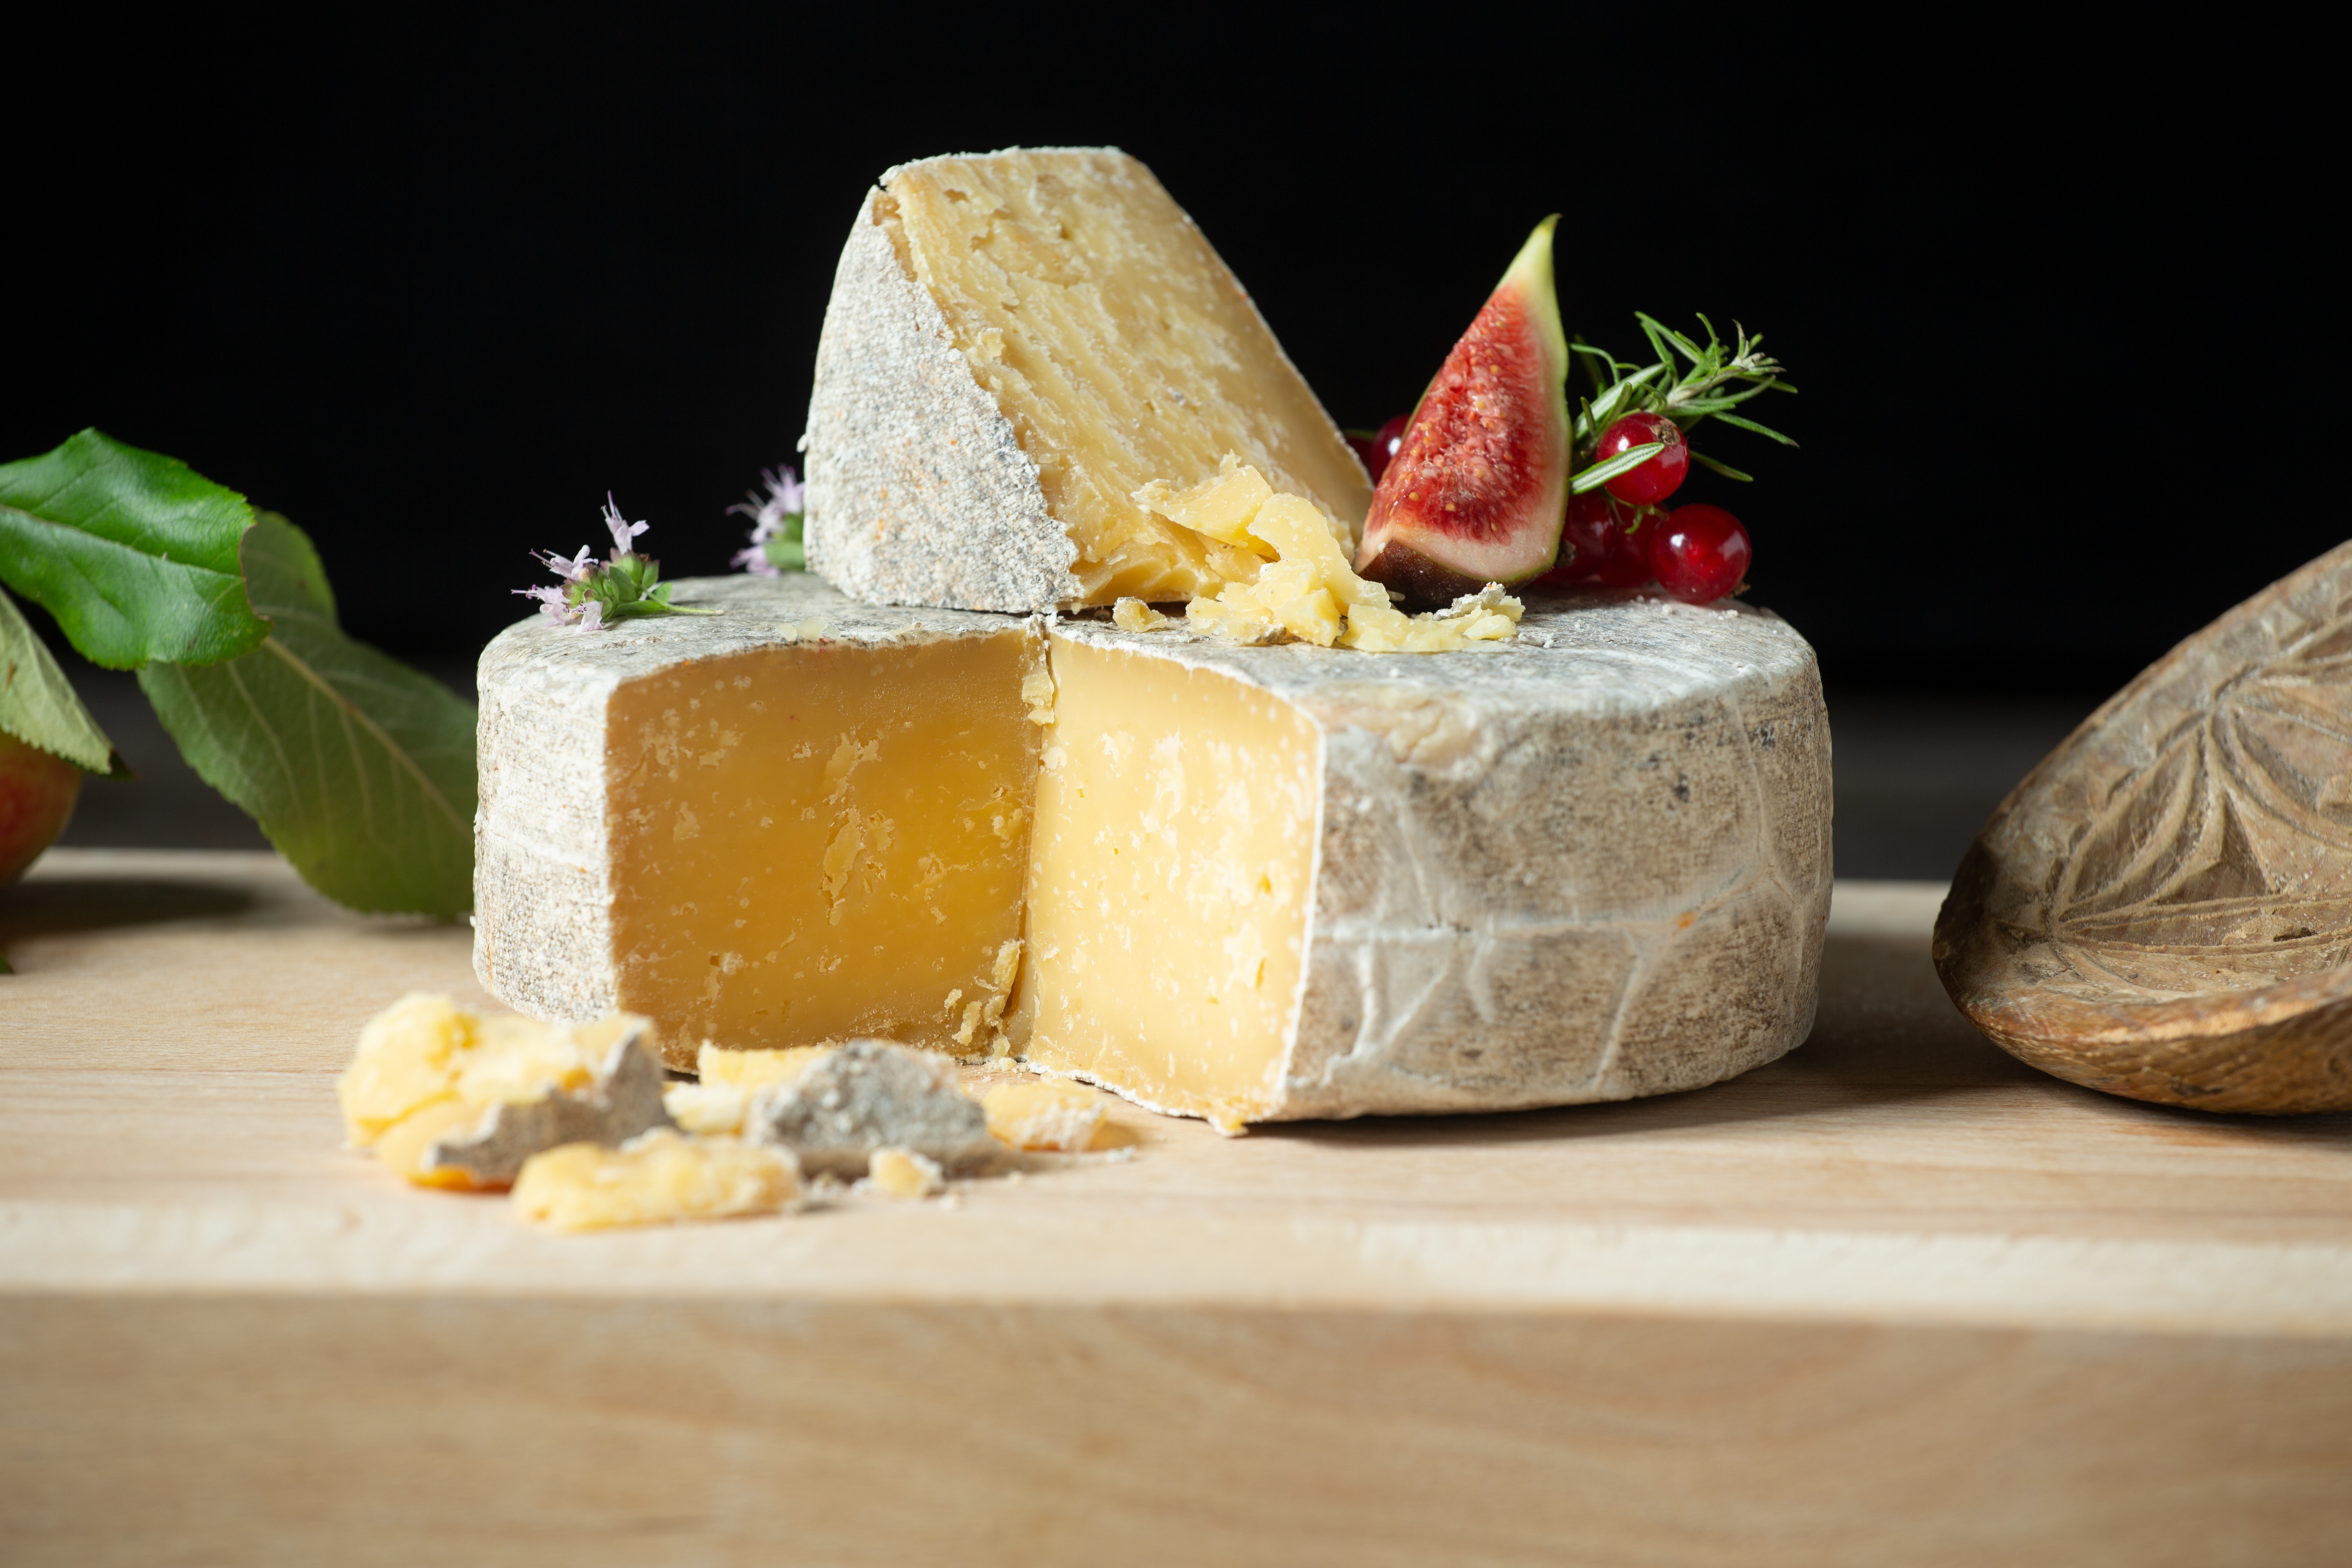 The region of Møre og Romsdal is renowned for its deeply rooted cheese-making traditions, reflected in a variety of exquisite cheeses. (Photo: Skarbø gård)